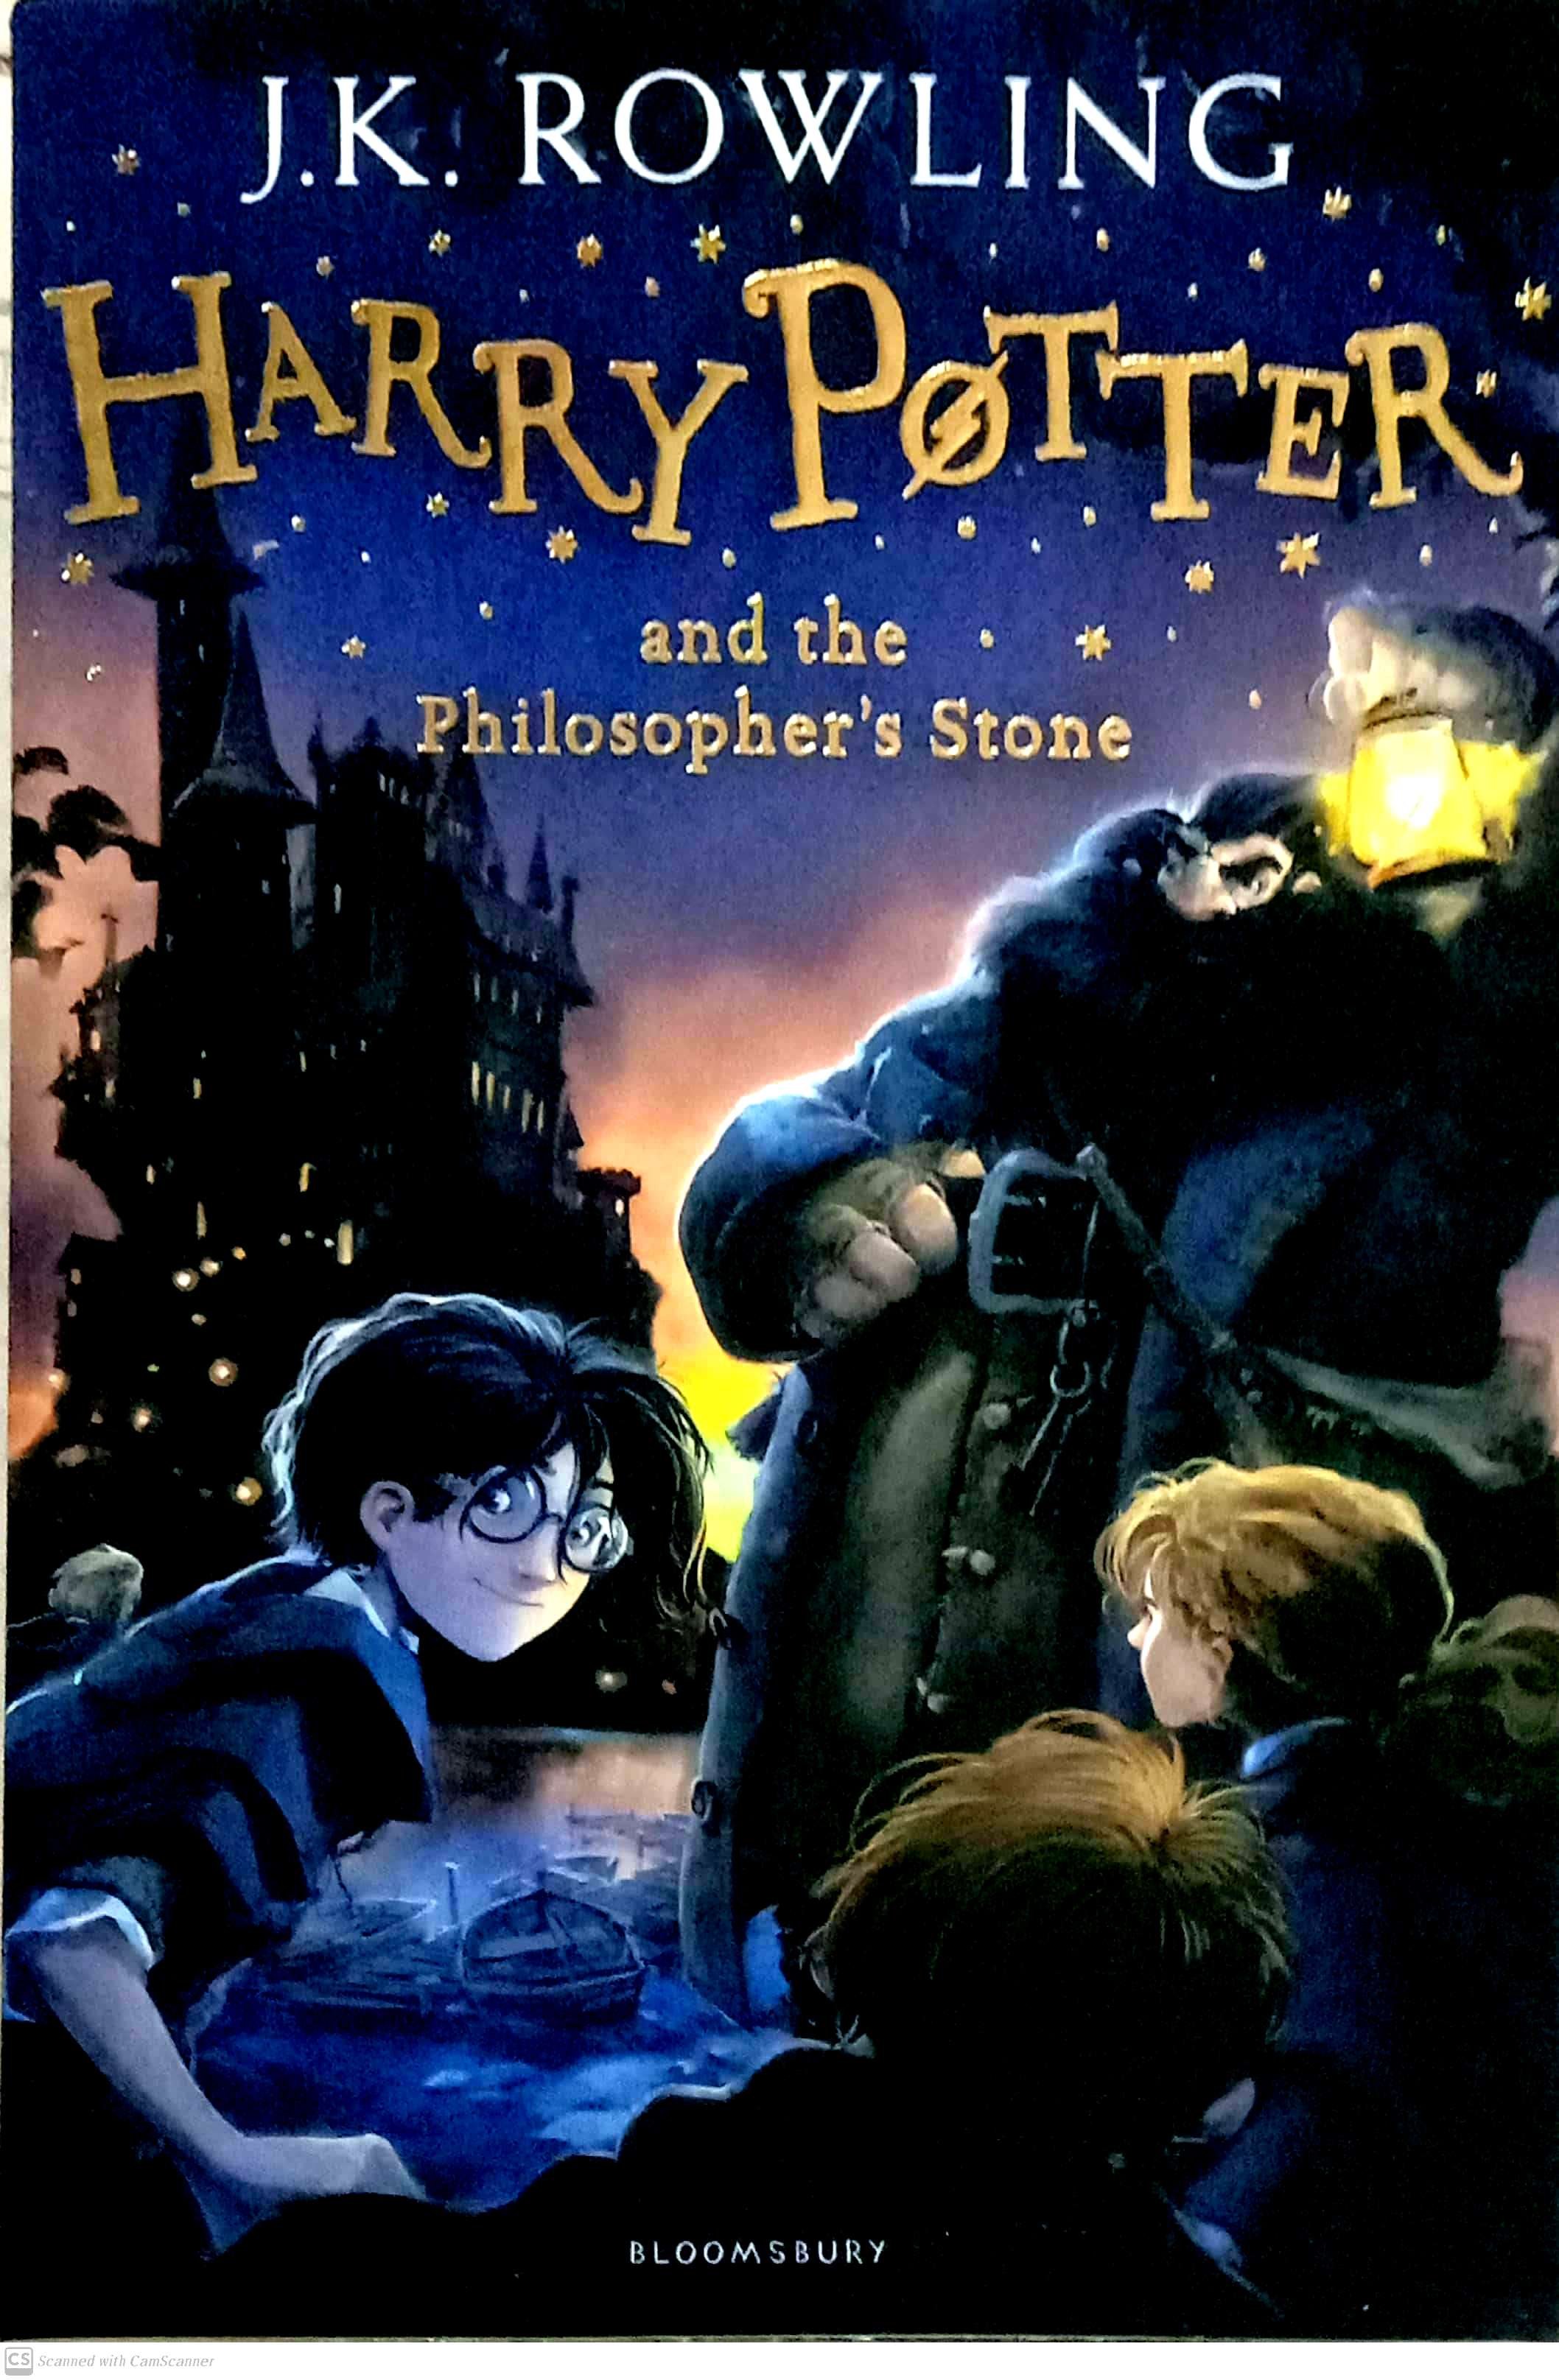 harry potter and the philosopher's stone book review essay